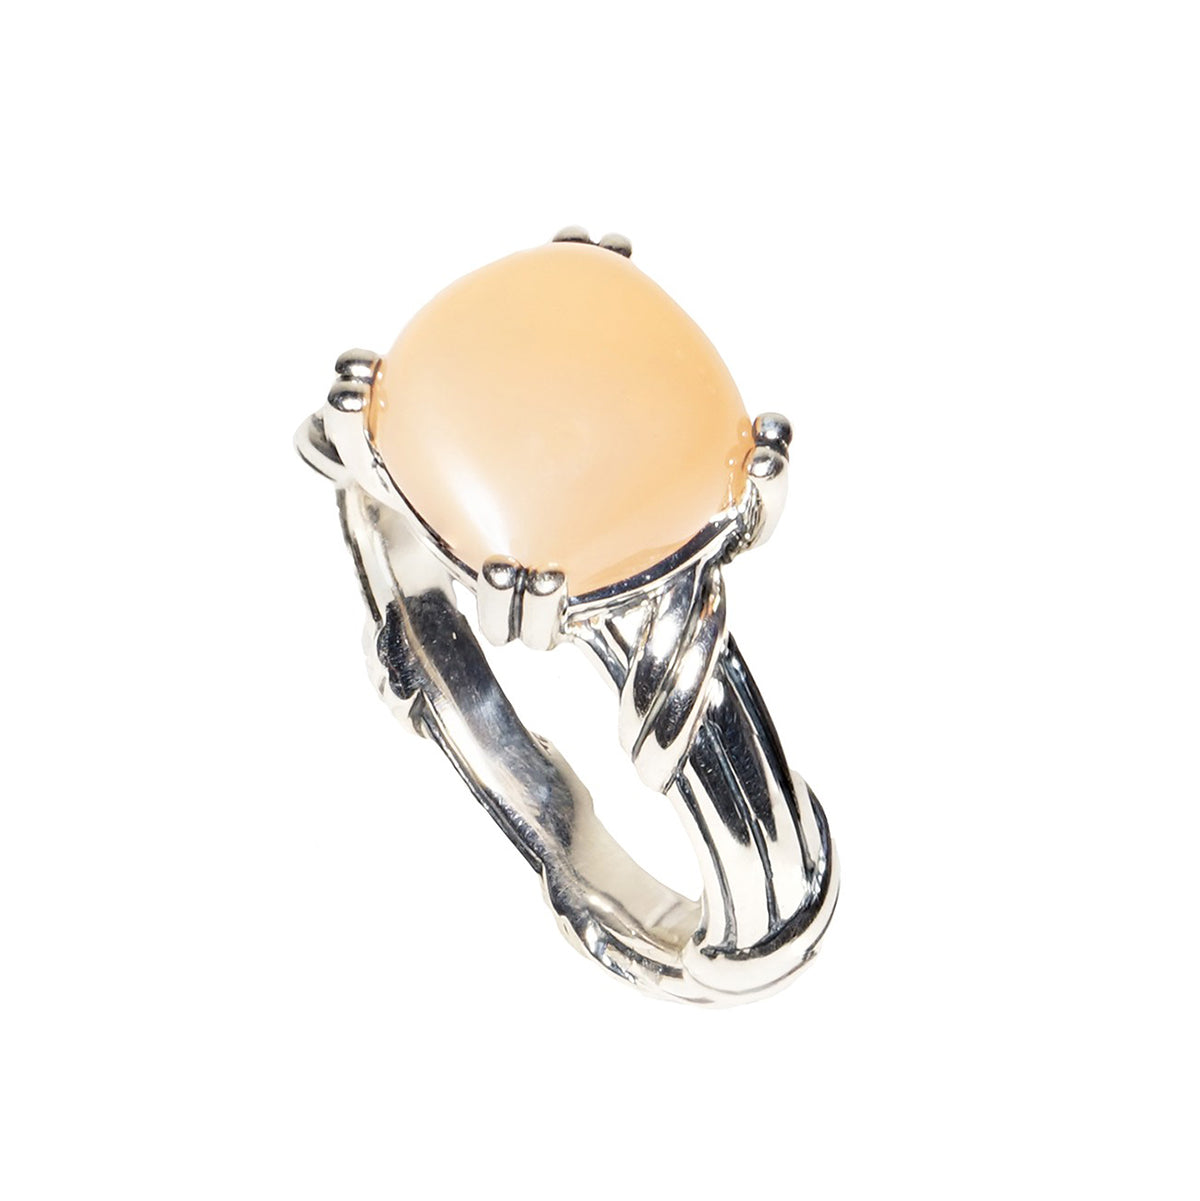 Fantasies Peach Moonstone Cabochon Ring in sterling silver 10mm